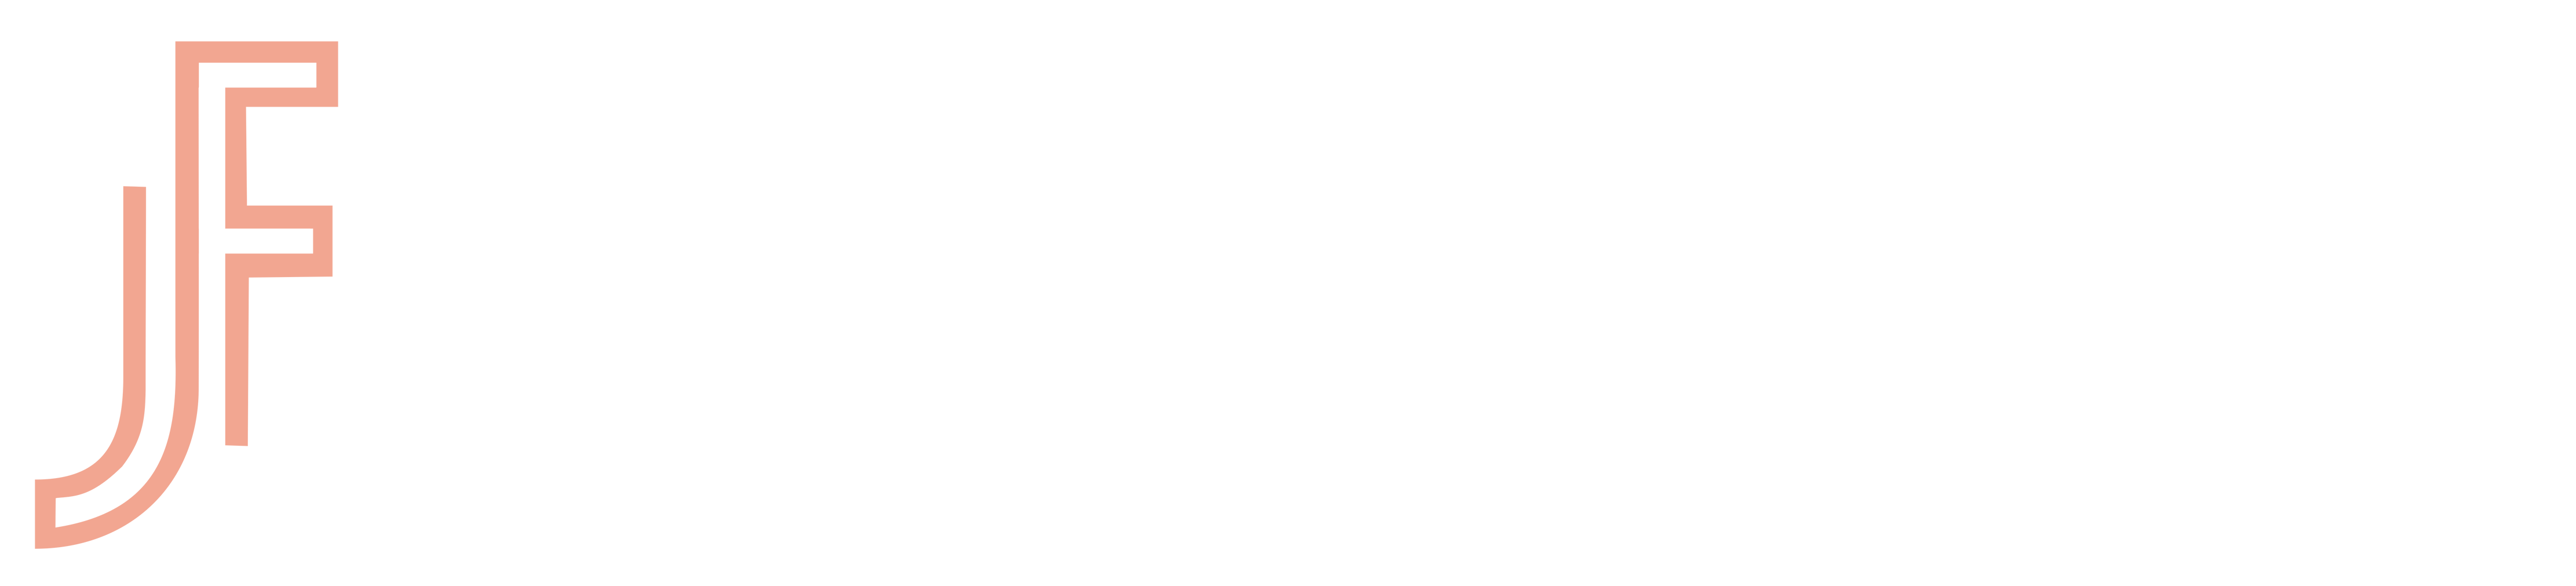 Jerry Forest LLC | Process Safety Improvement Consulting